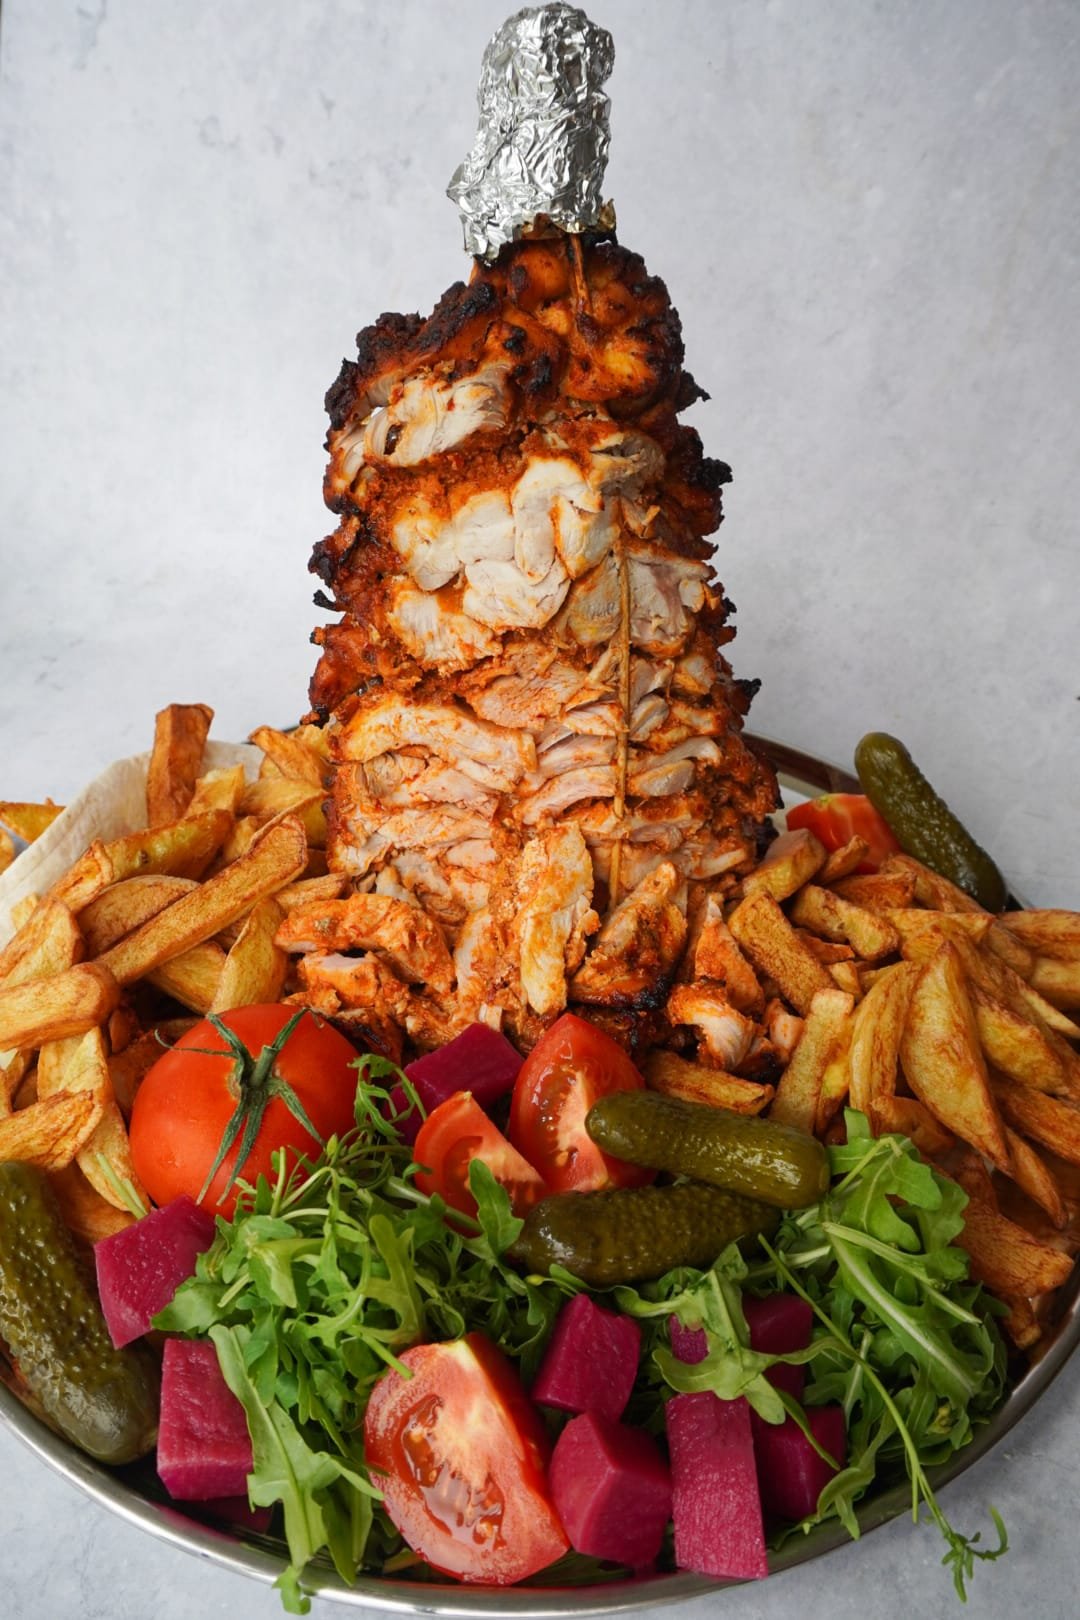 Put together in a few minutes, this Chicken Tavuk Doner with Chips is an absolute masterpiece, ready to serve family and friends all night.